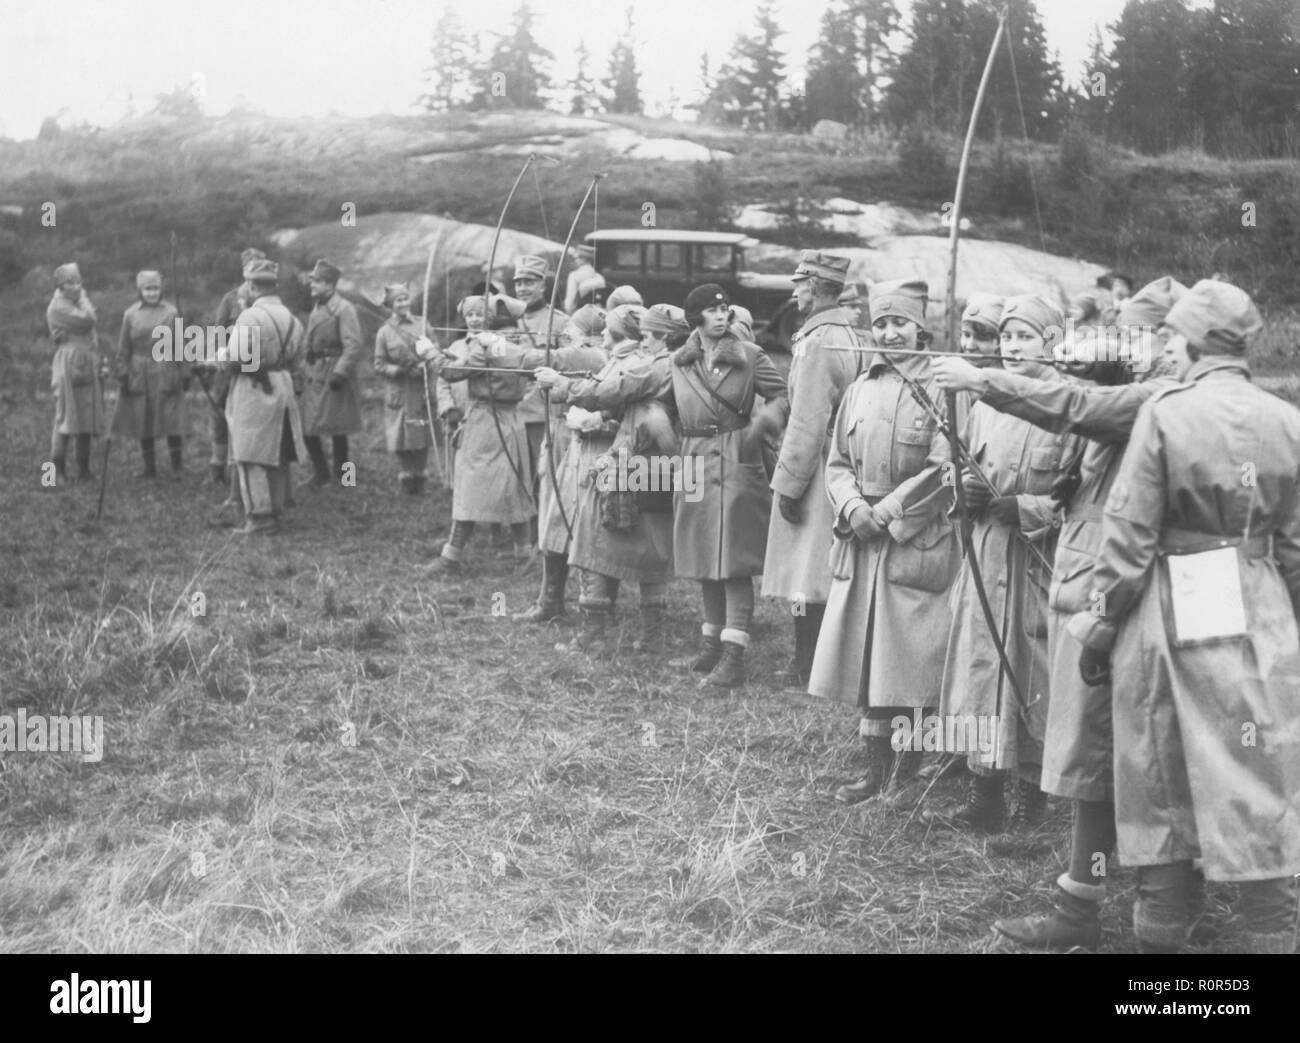 Archery in the 1920s. A group of women from the volenteer military organisation Lottorna is competing in archery. Sweden 1920s Stock Photo